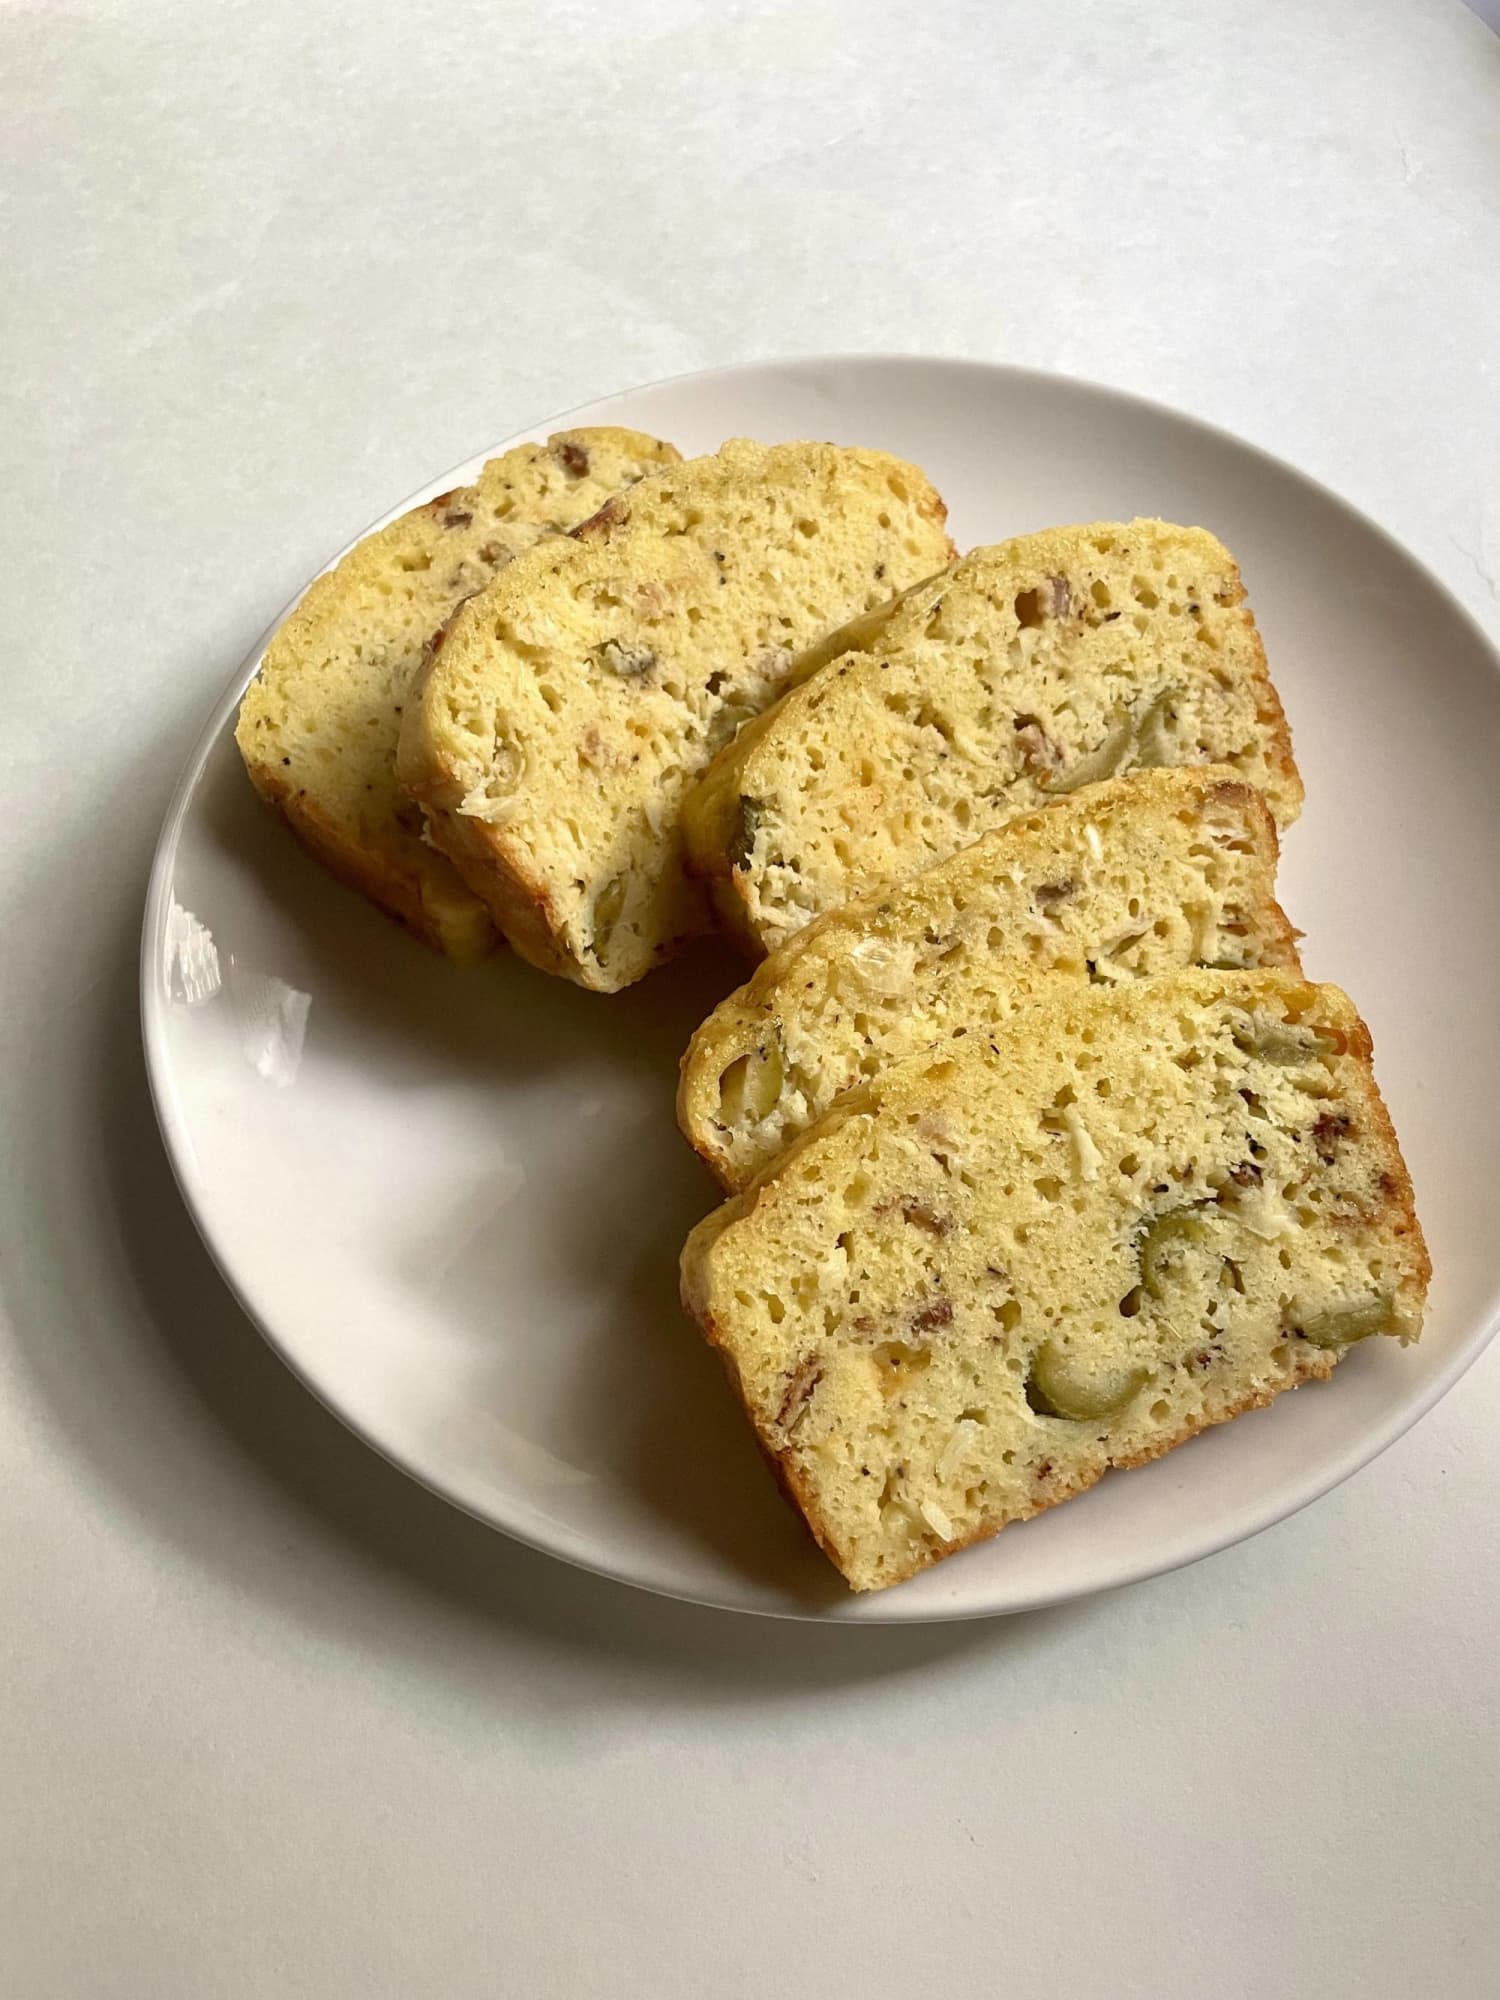 This Popular French Quick Bread Is My Favorite Way to Eat Cake All Day